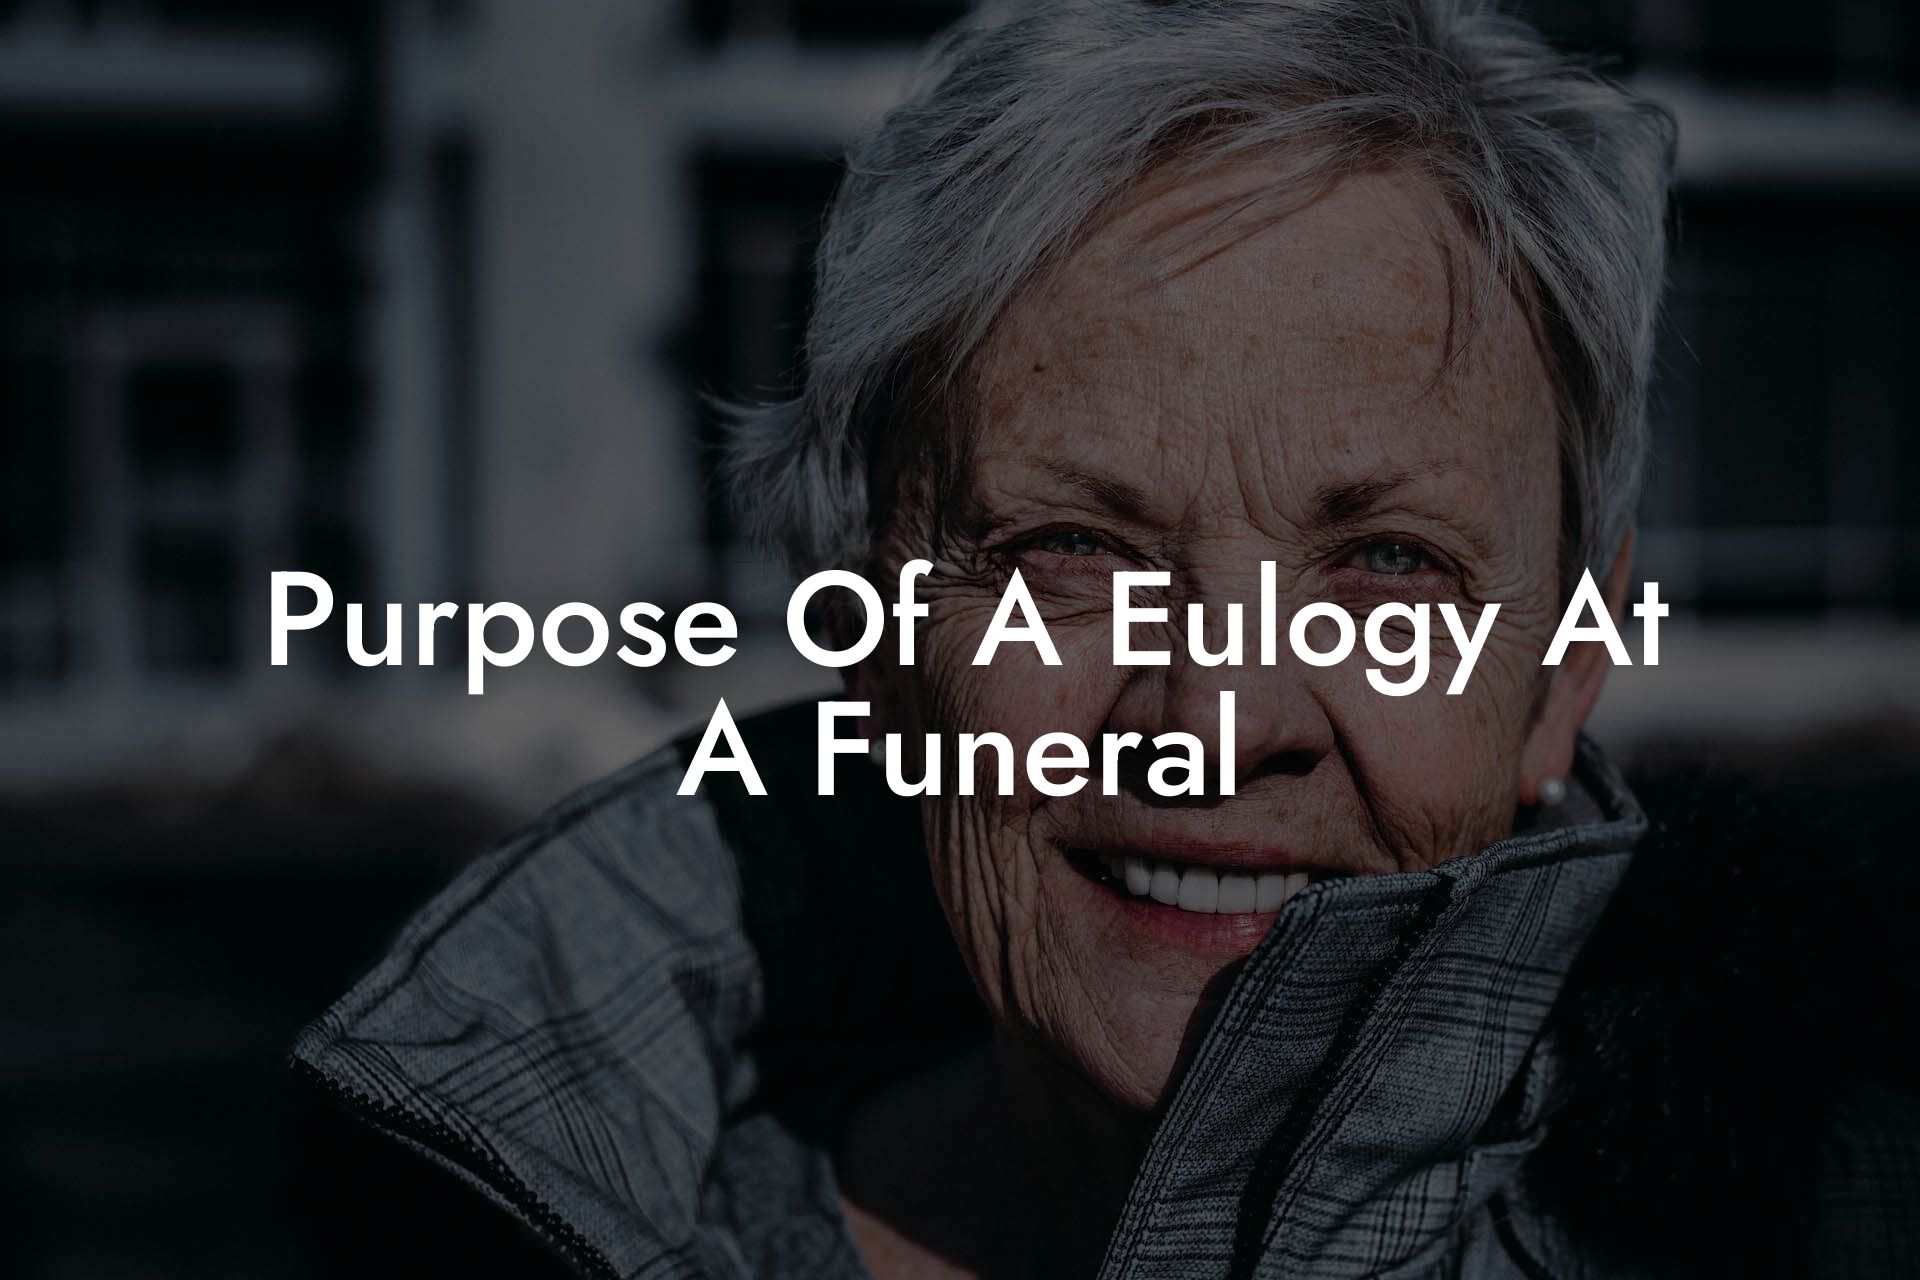 Purpose Of A Eulogy At A Funeral